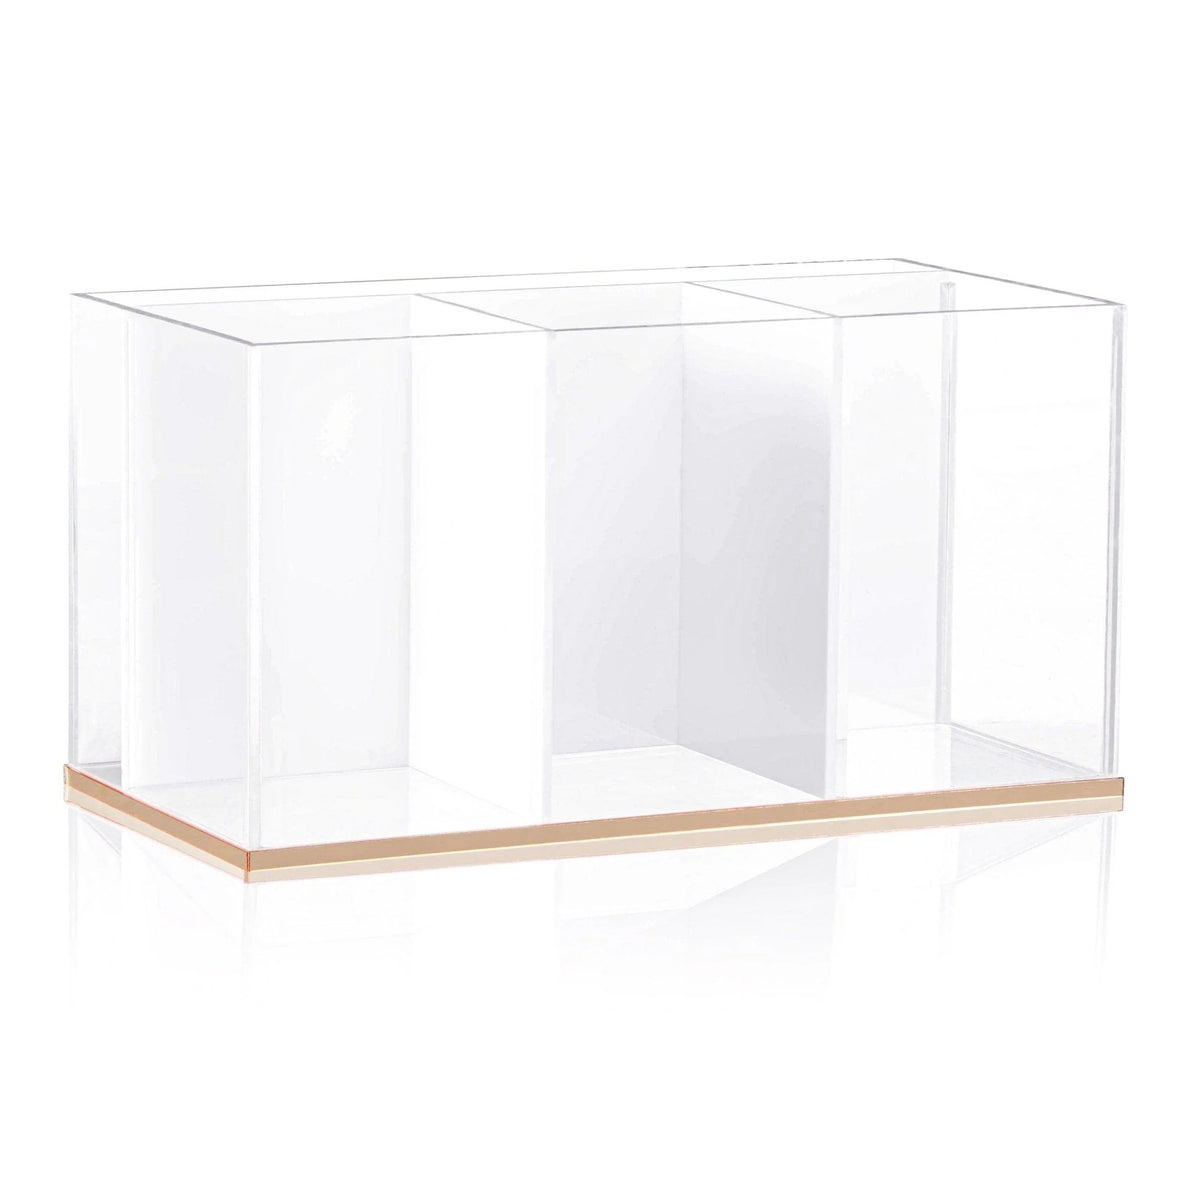 Waterdale Classic Silverware Caddy Lucite With Gold Border, 3 Compartments, Dimensions: 8"x4"x4.5"